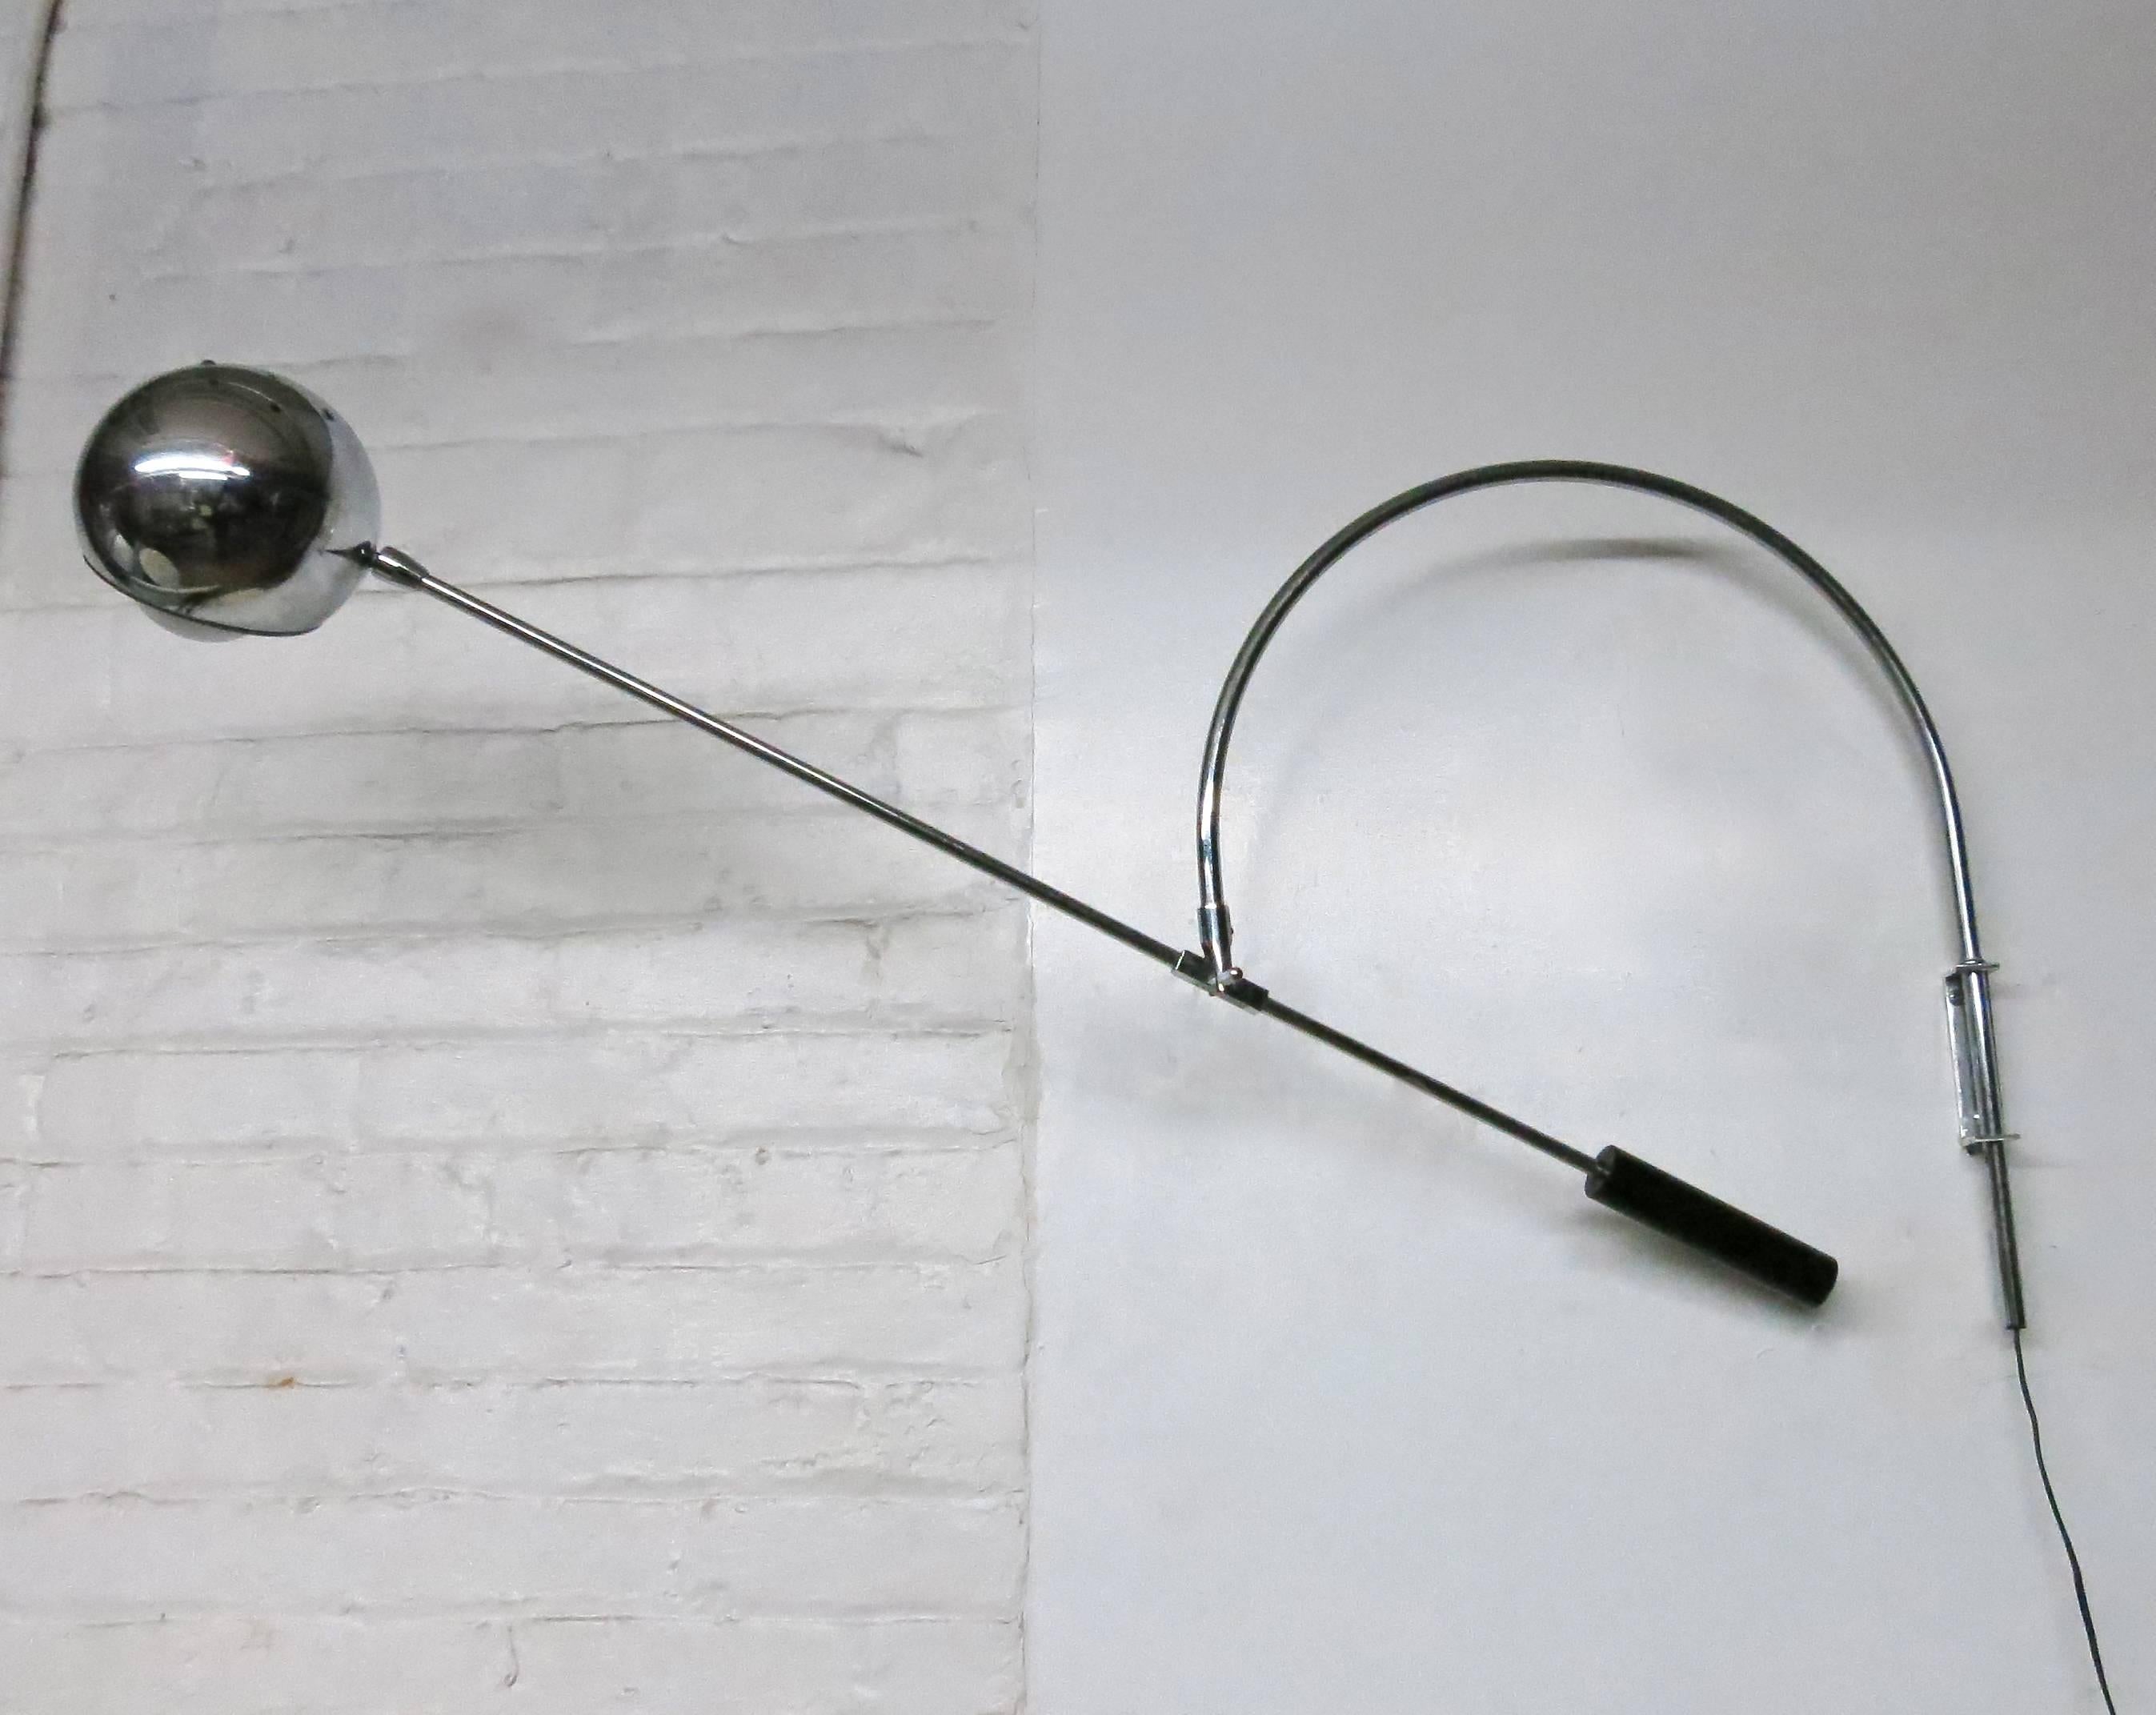 Wall-mounted bracket that holds a tubular steel rod arched at the top that can sway right to left and connects to a straight, counter-balanced arm that moves up and down and side-to-side. The arm has a an articulating light at one end and a counter